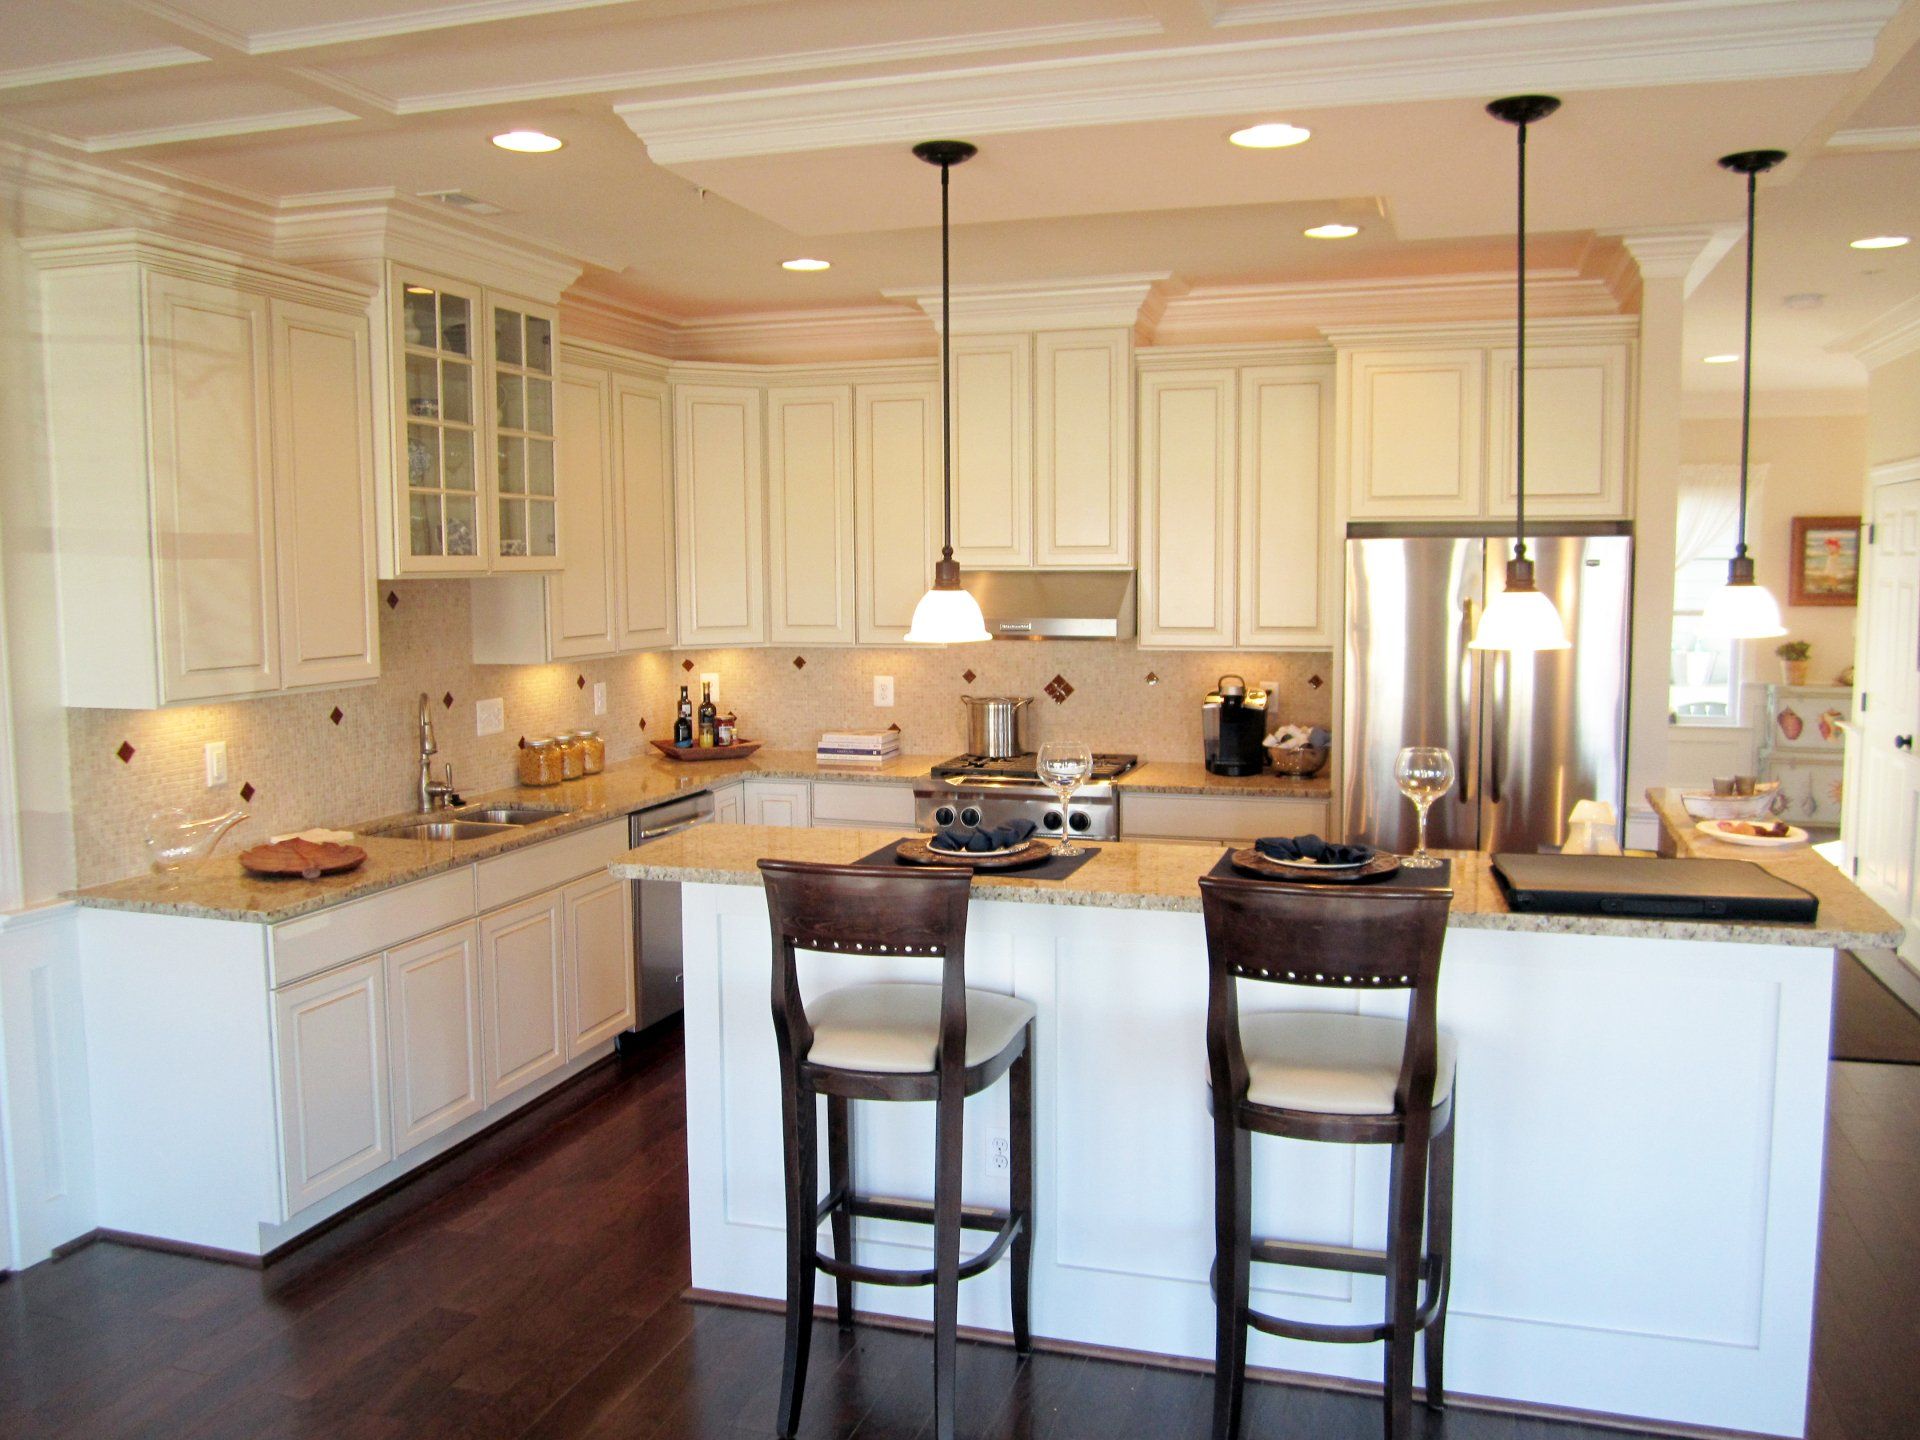 Kitchen | Kitty Hawk Legacy | Covell Communities | Chester, Maryland 21619